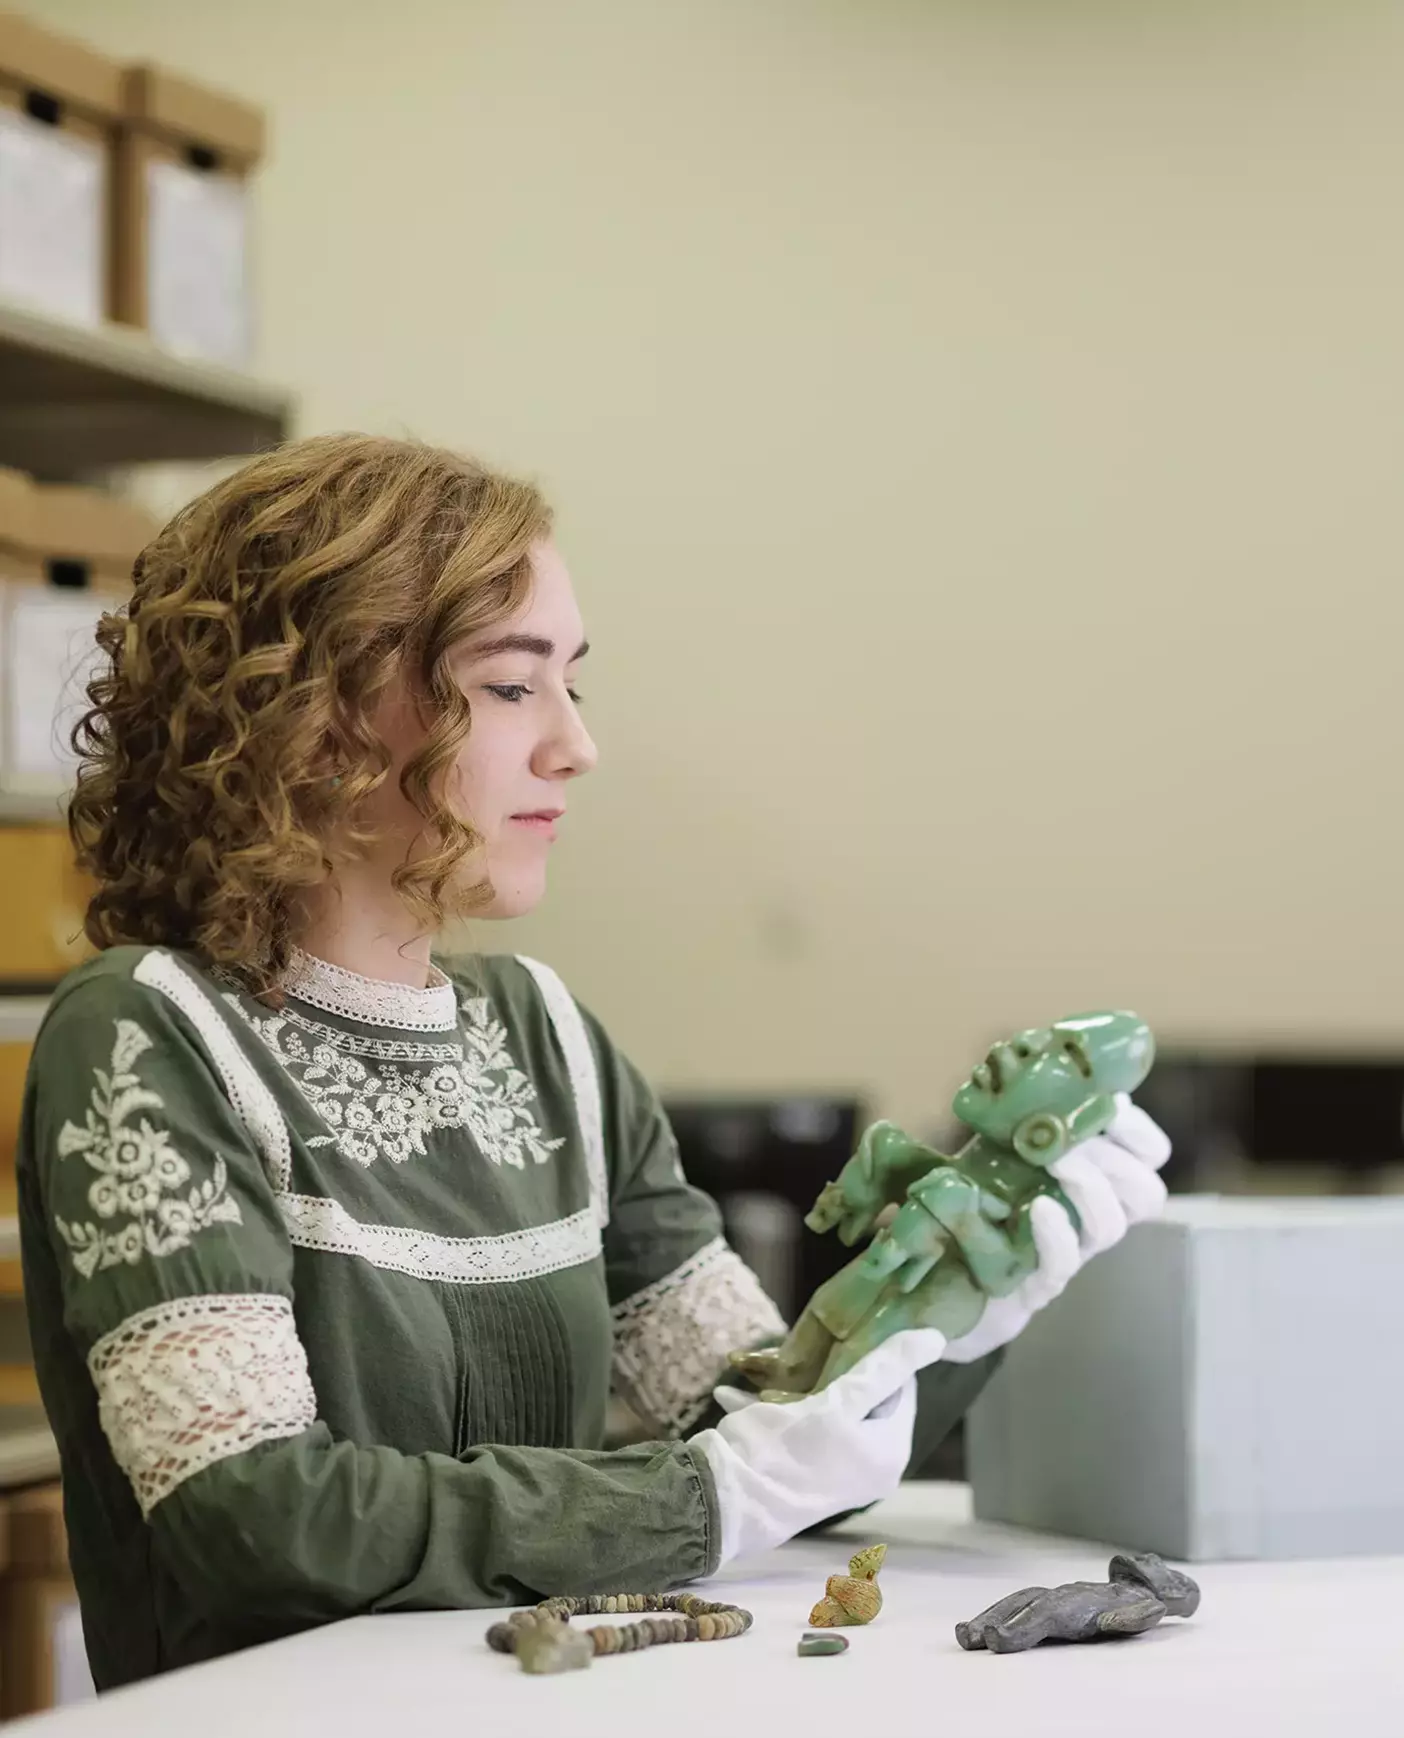 Student Chloe Burkey shifts through Mesoamerican greenstone figurines, looking for forgeries